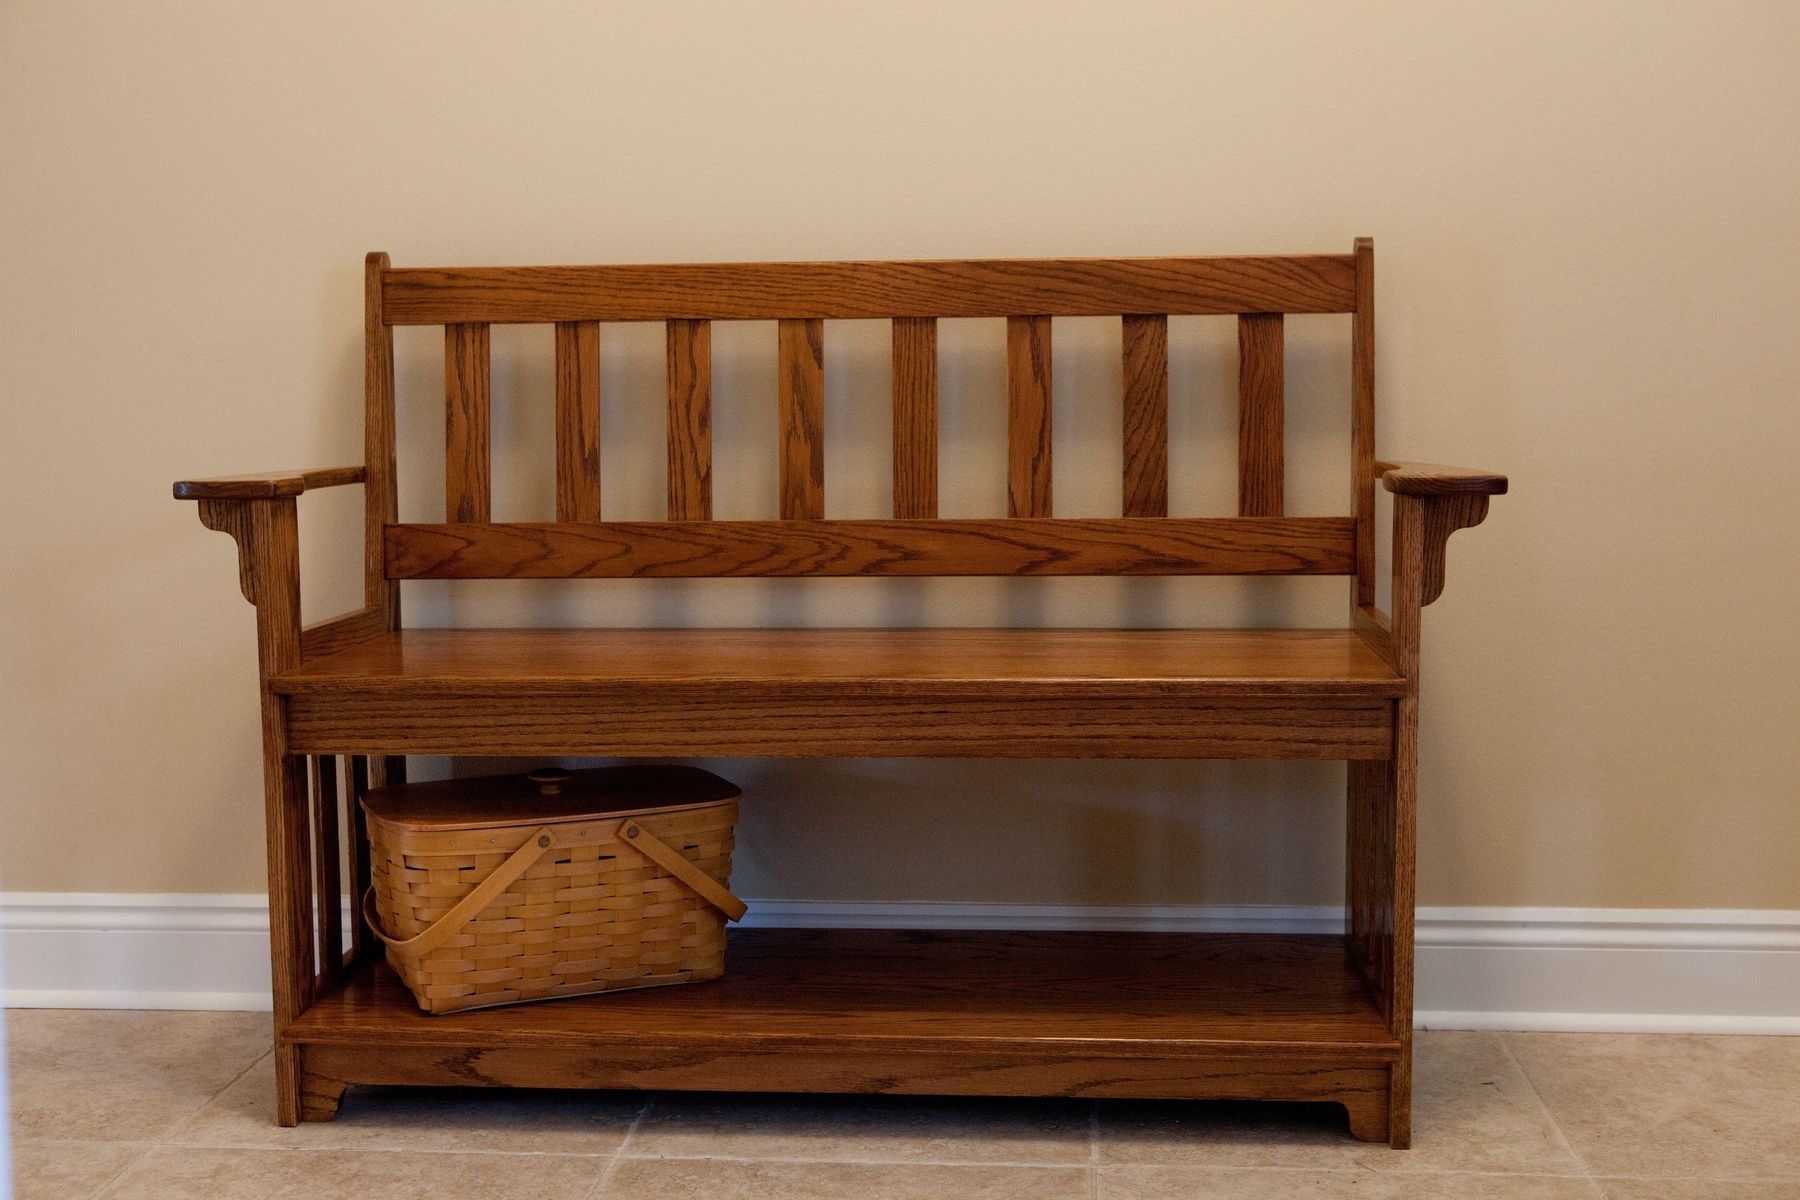 Custom Made Entryway Bench by Vintage Woodworks Of Navarre | CustomMade.com